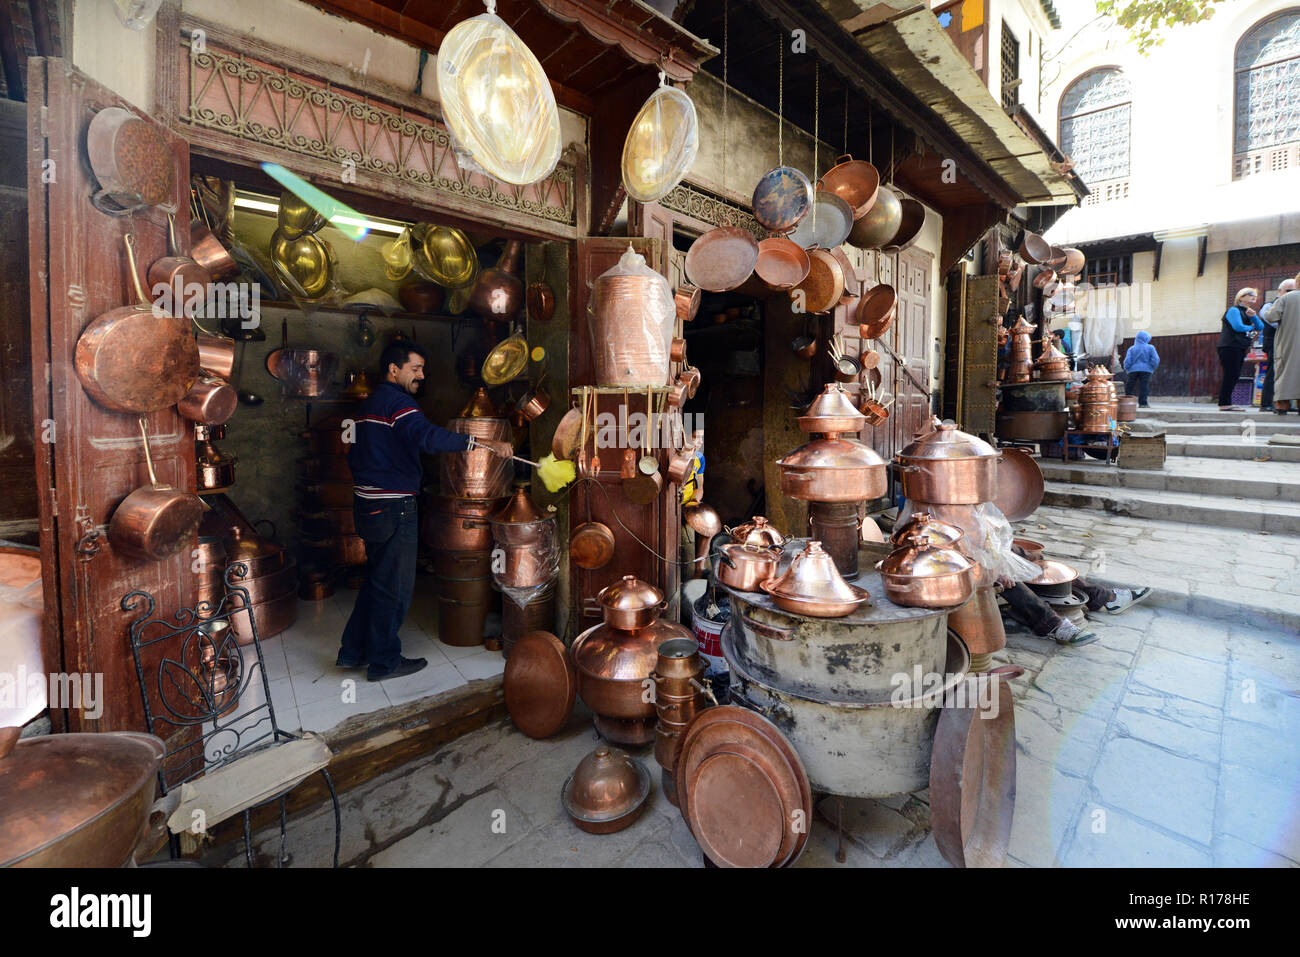 A blacksmith working in the old market of Fes. Stock Photo